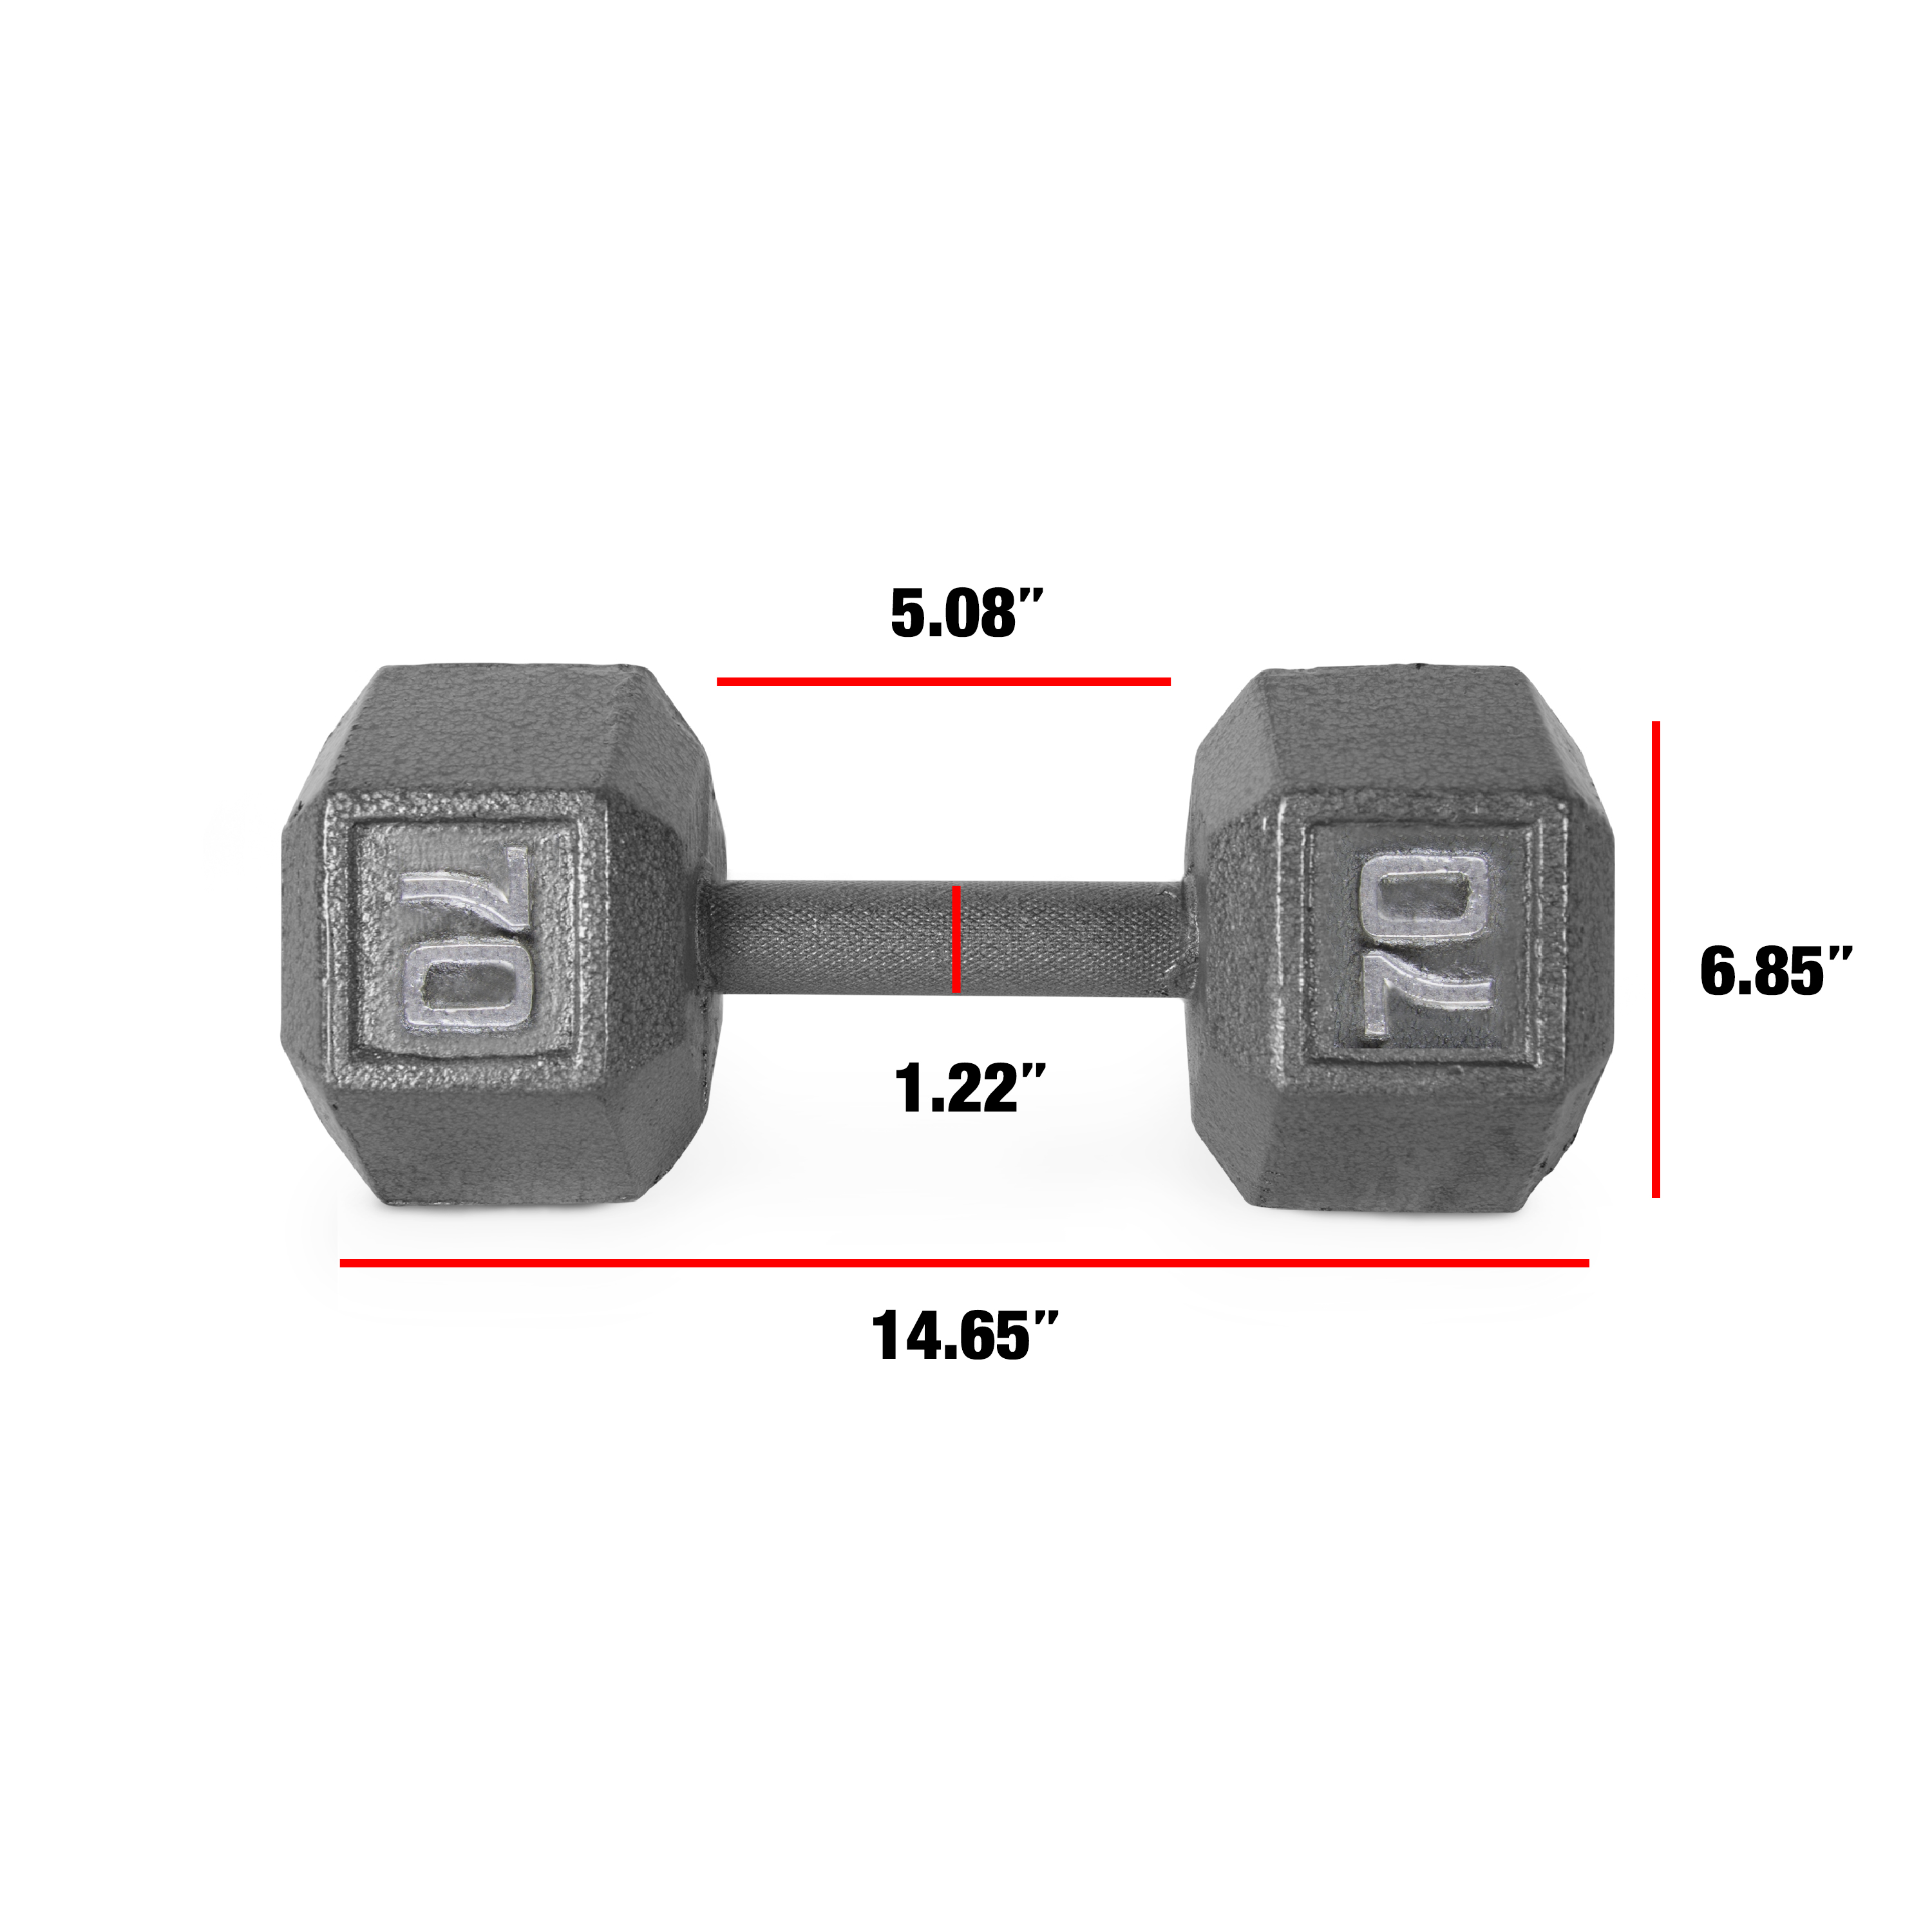 CAP Barbell 70lb Cast Iron Hex Dumbbell, Single - image 4 of 6